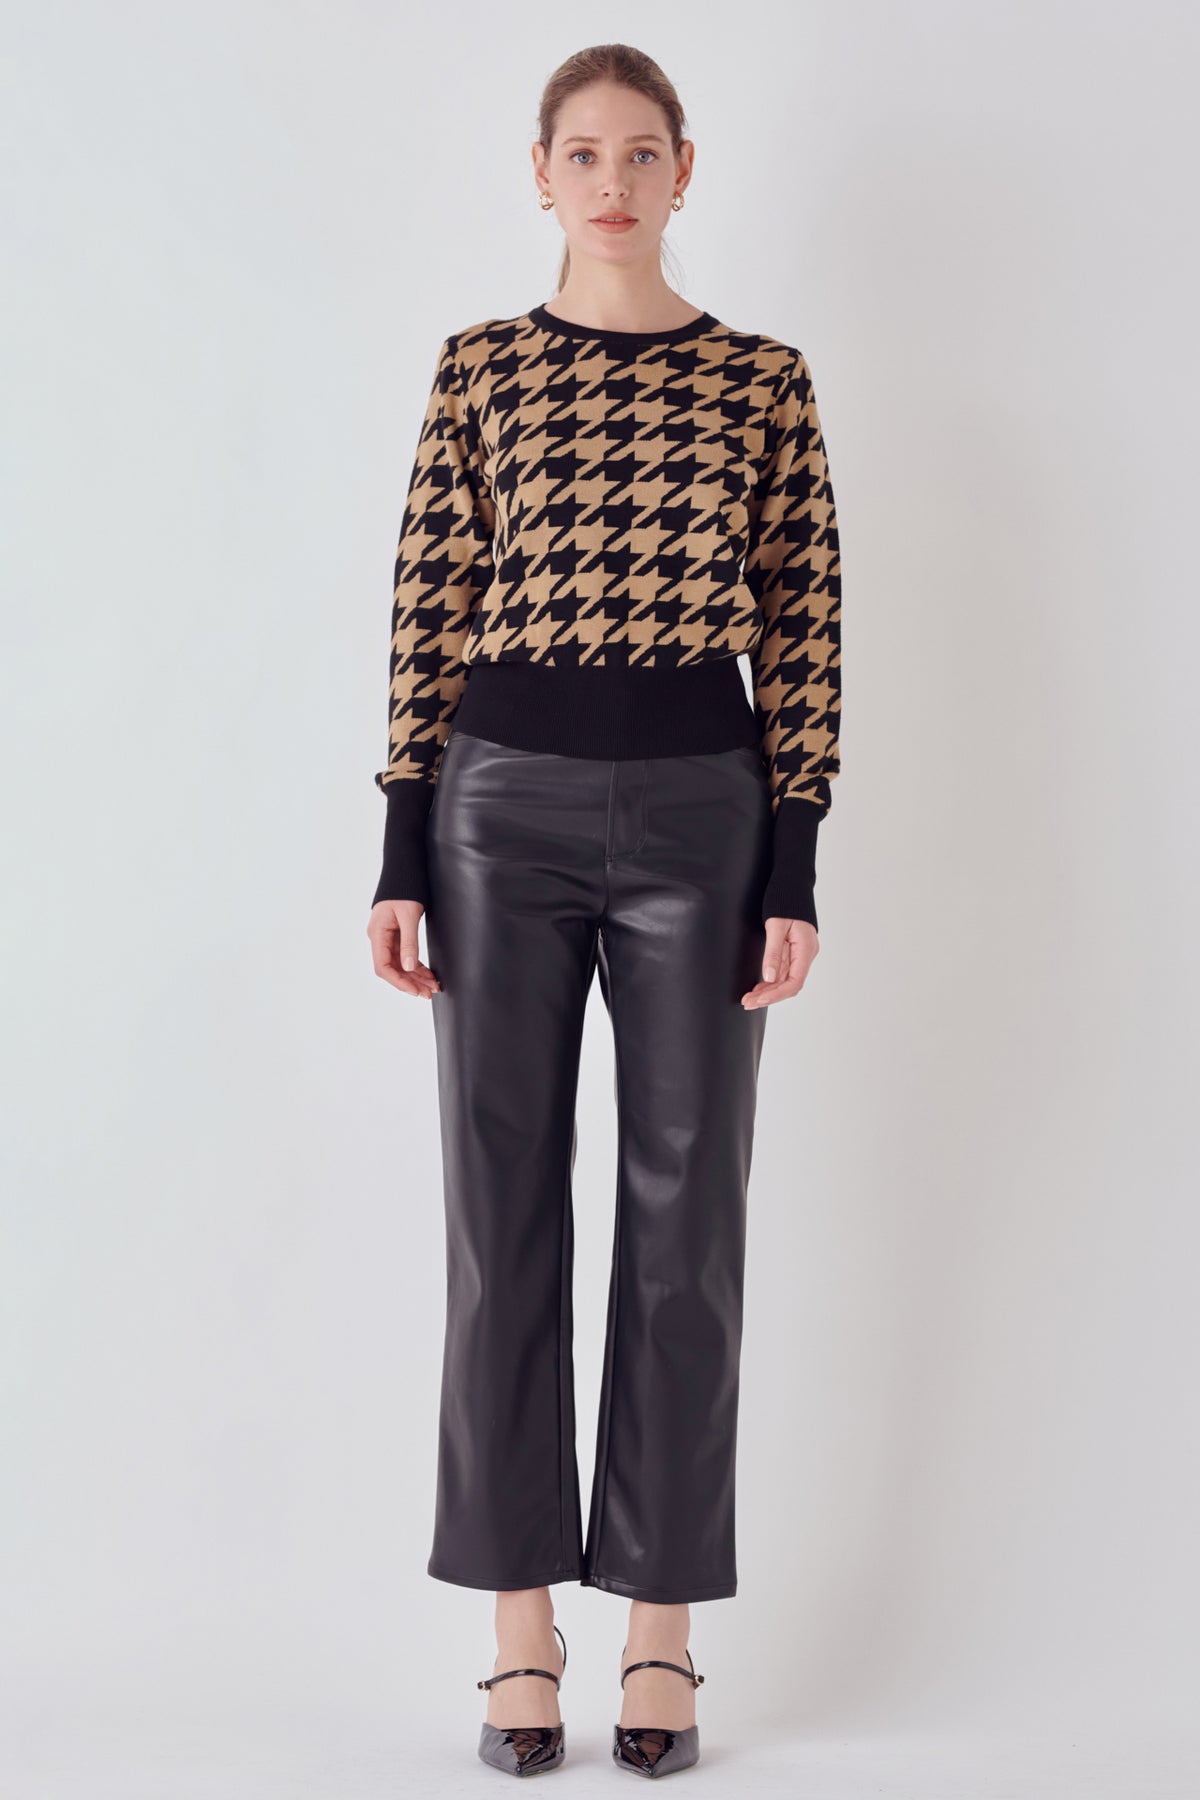 ENDLESS ROSE - Knit Houndstooth Sweater - TOPS available at Objectrare